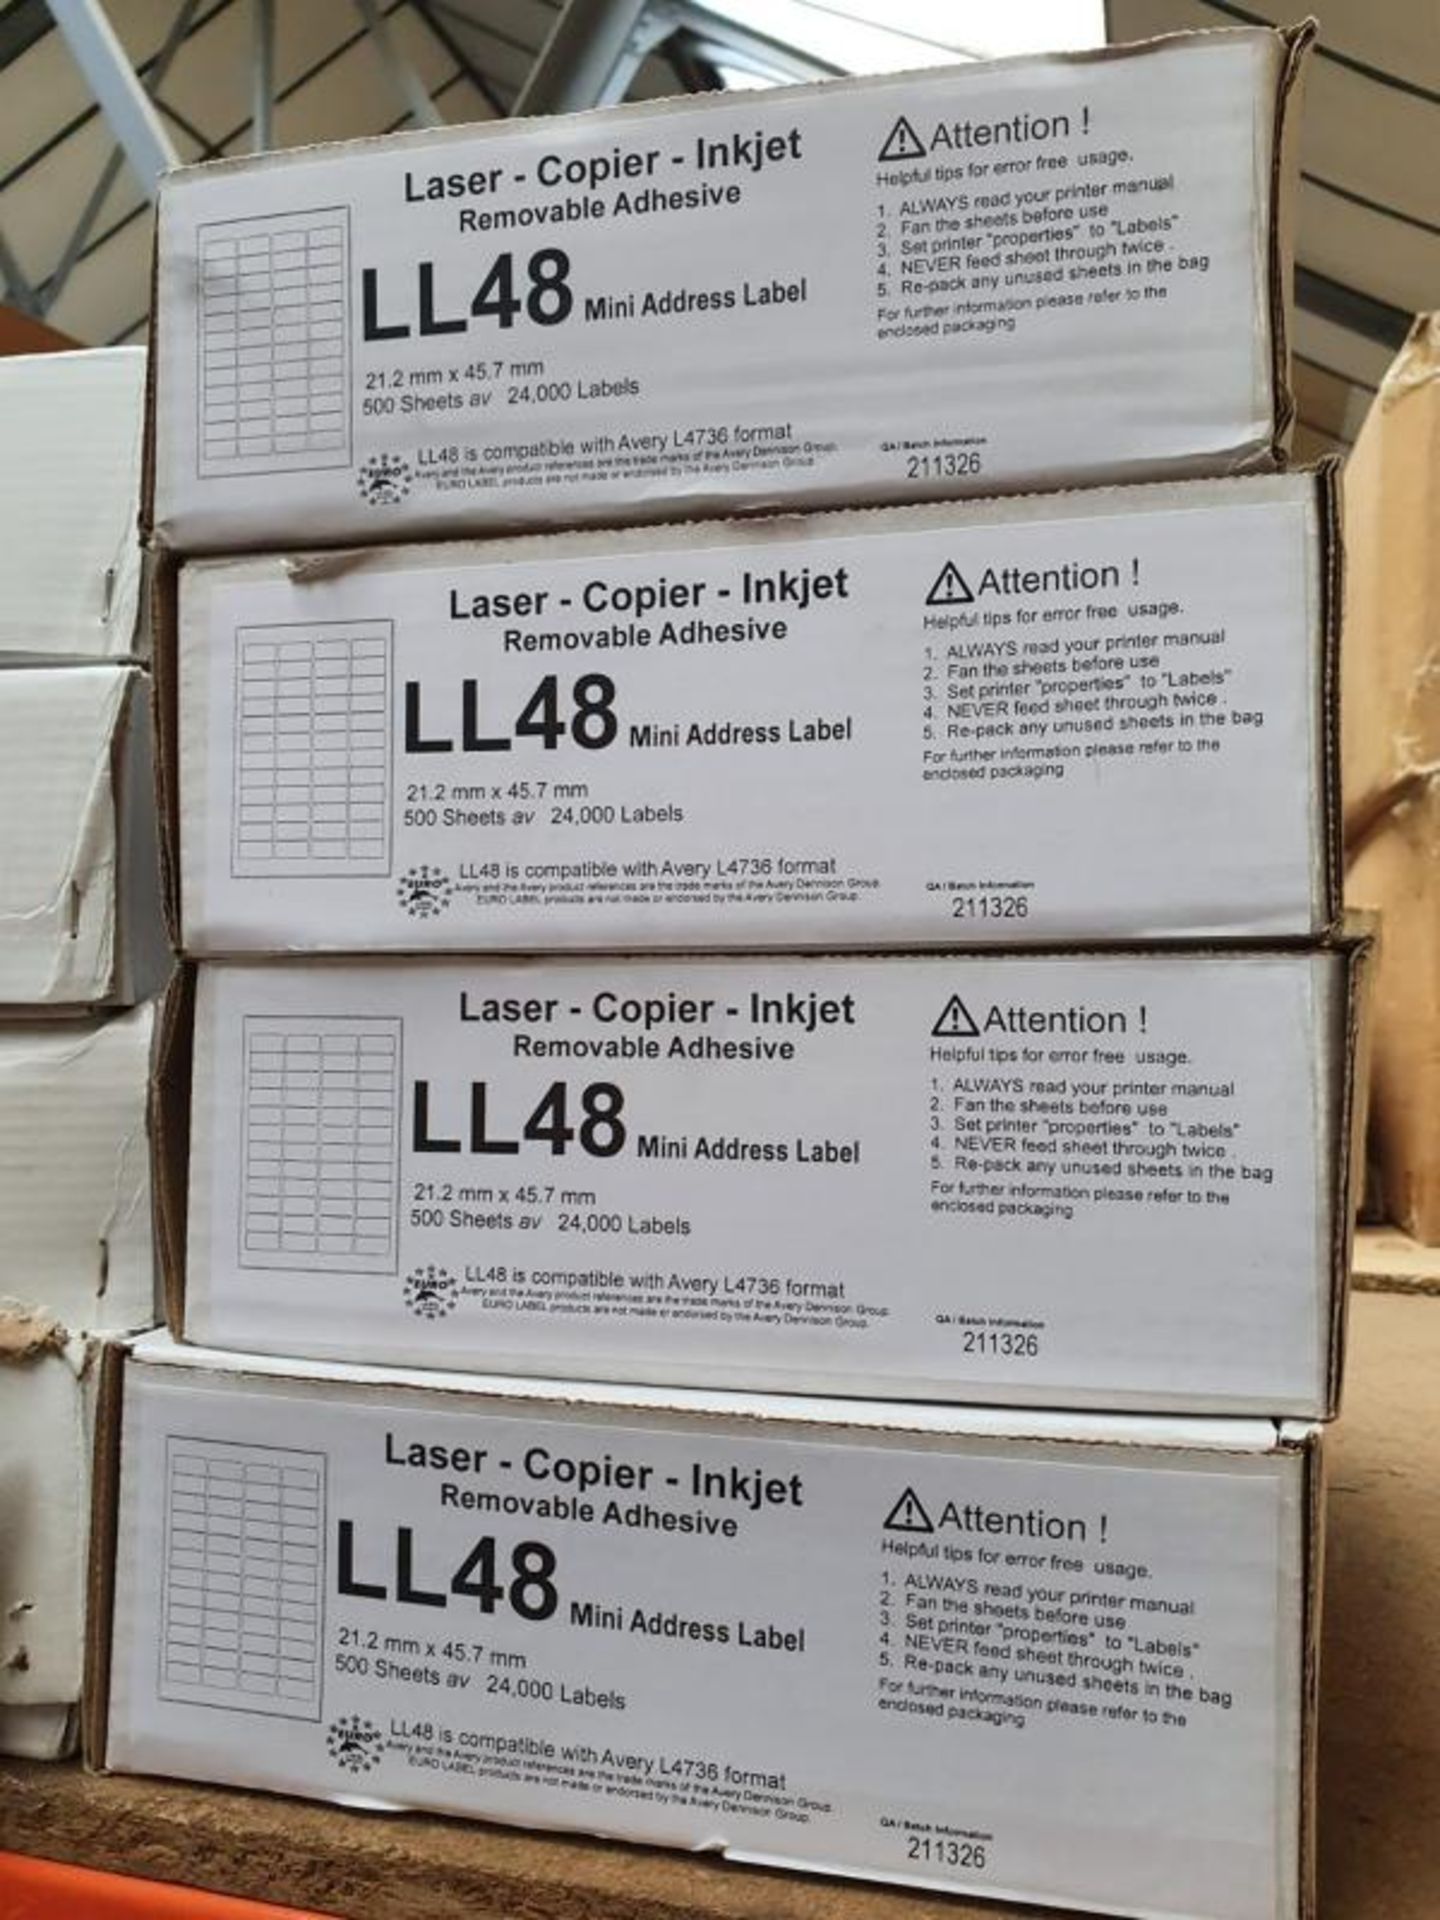 4 x Boxes Of LL48 Mini Adress Labels (2000 Sheets) - Unused Boxed Stock - Low Start, No Reserve - Image 2 of 2